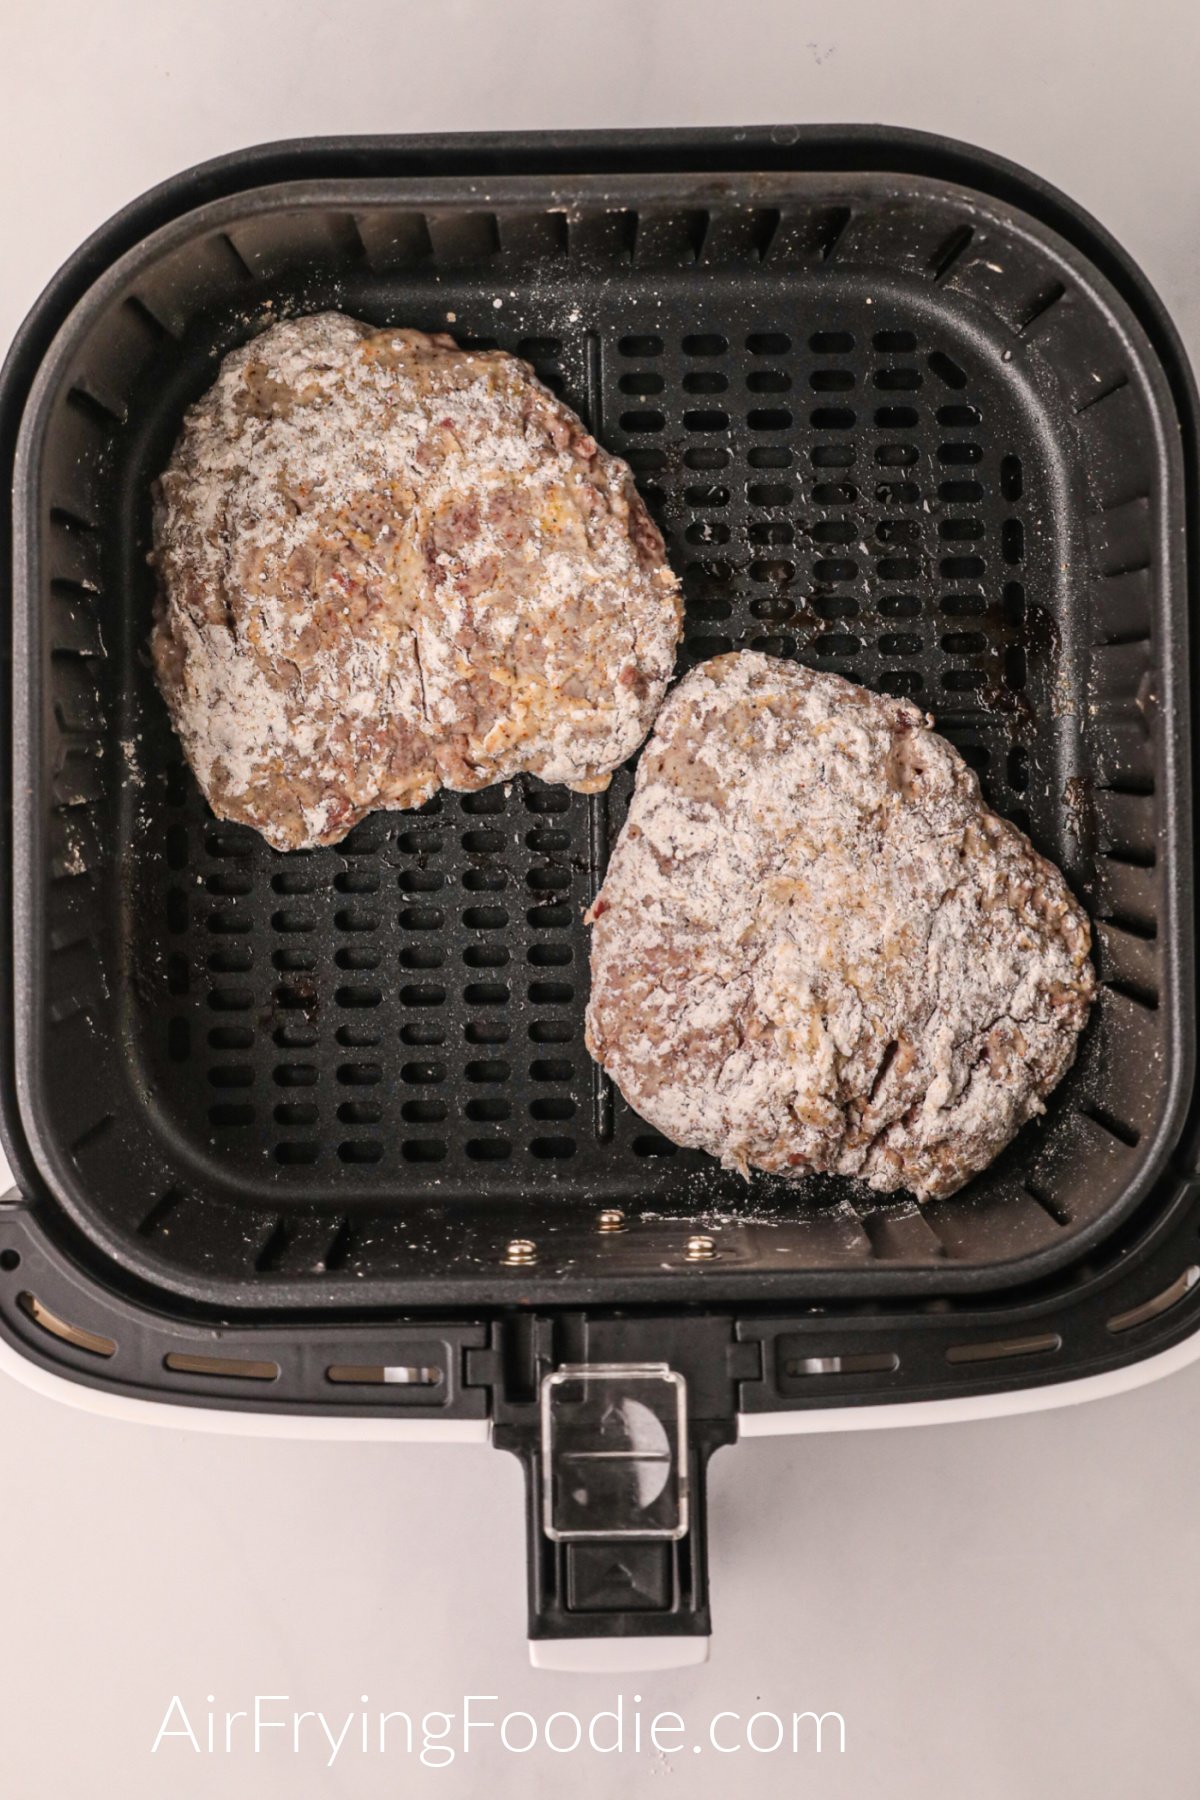 Breaded round steaks in the basket of the air fryer, ready to cook.